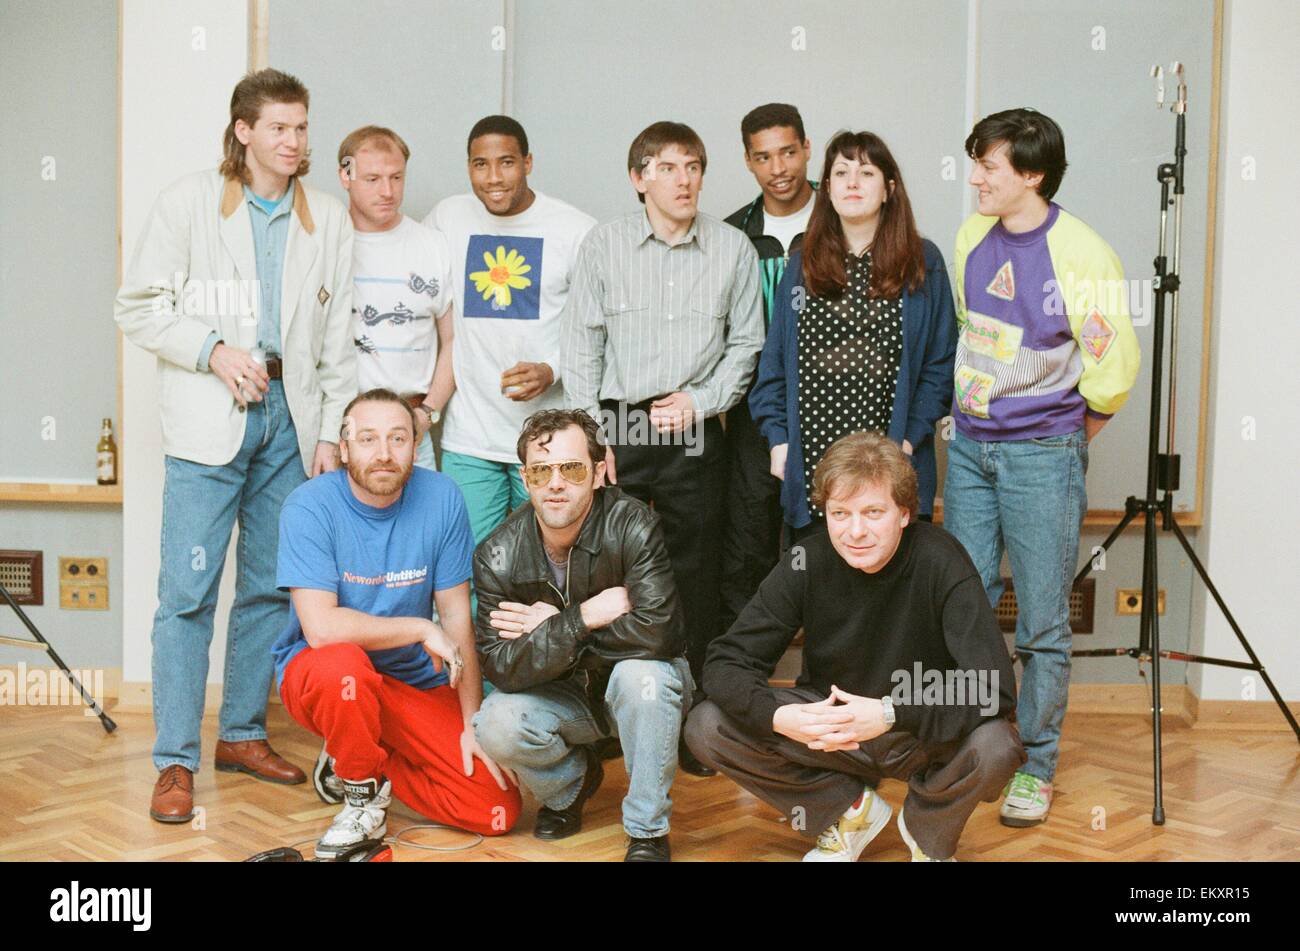 England World Cup Squad in the recording studio after joining music group New Order to record a World Cup Song ahead of the finals in Italy later this year, pictured 25th March 1990. The song will be called World In Motion. Recording studio in Berkshire * Stock Photo